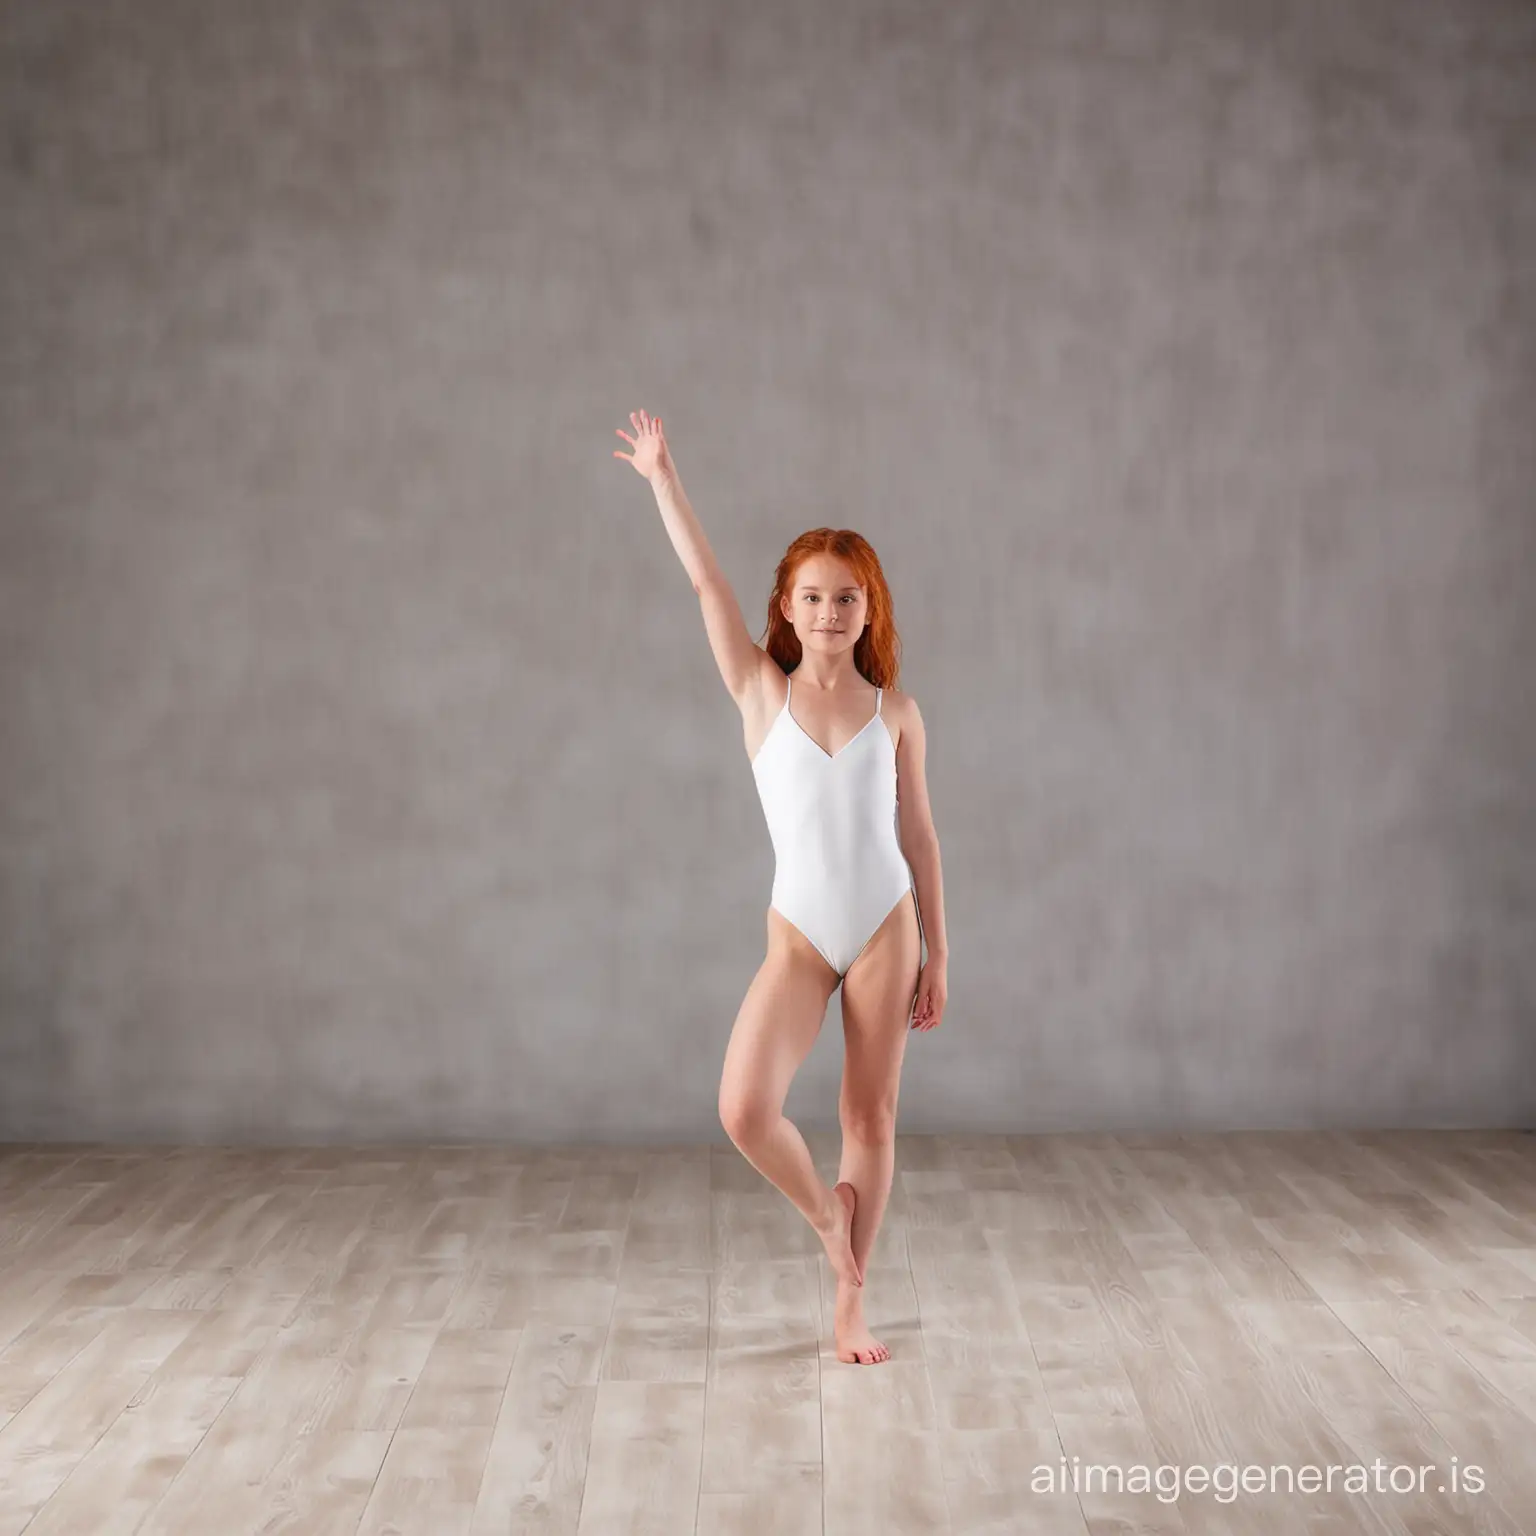 Beautiful young redhaired barefoot gymnast  in white leotard standing posing during her floor exercise.